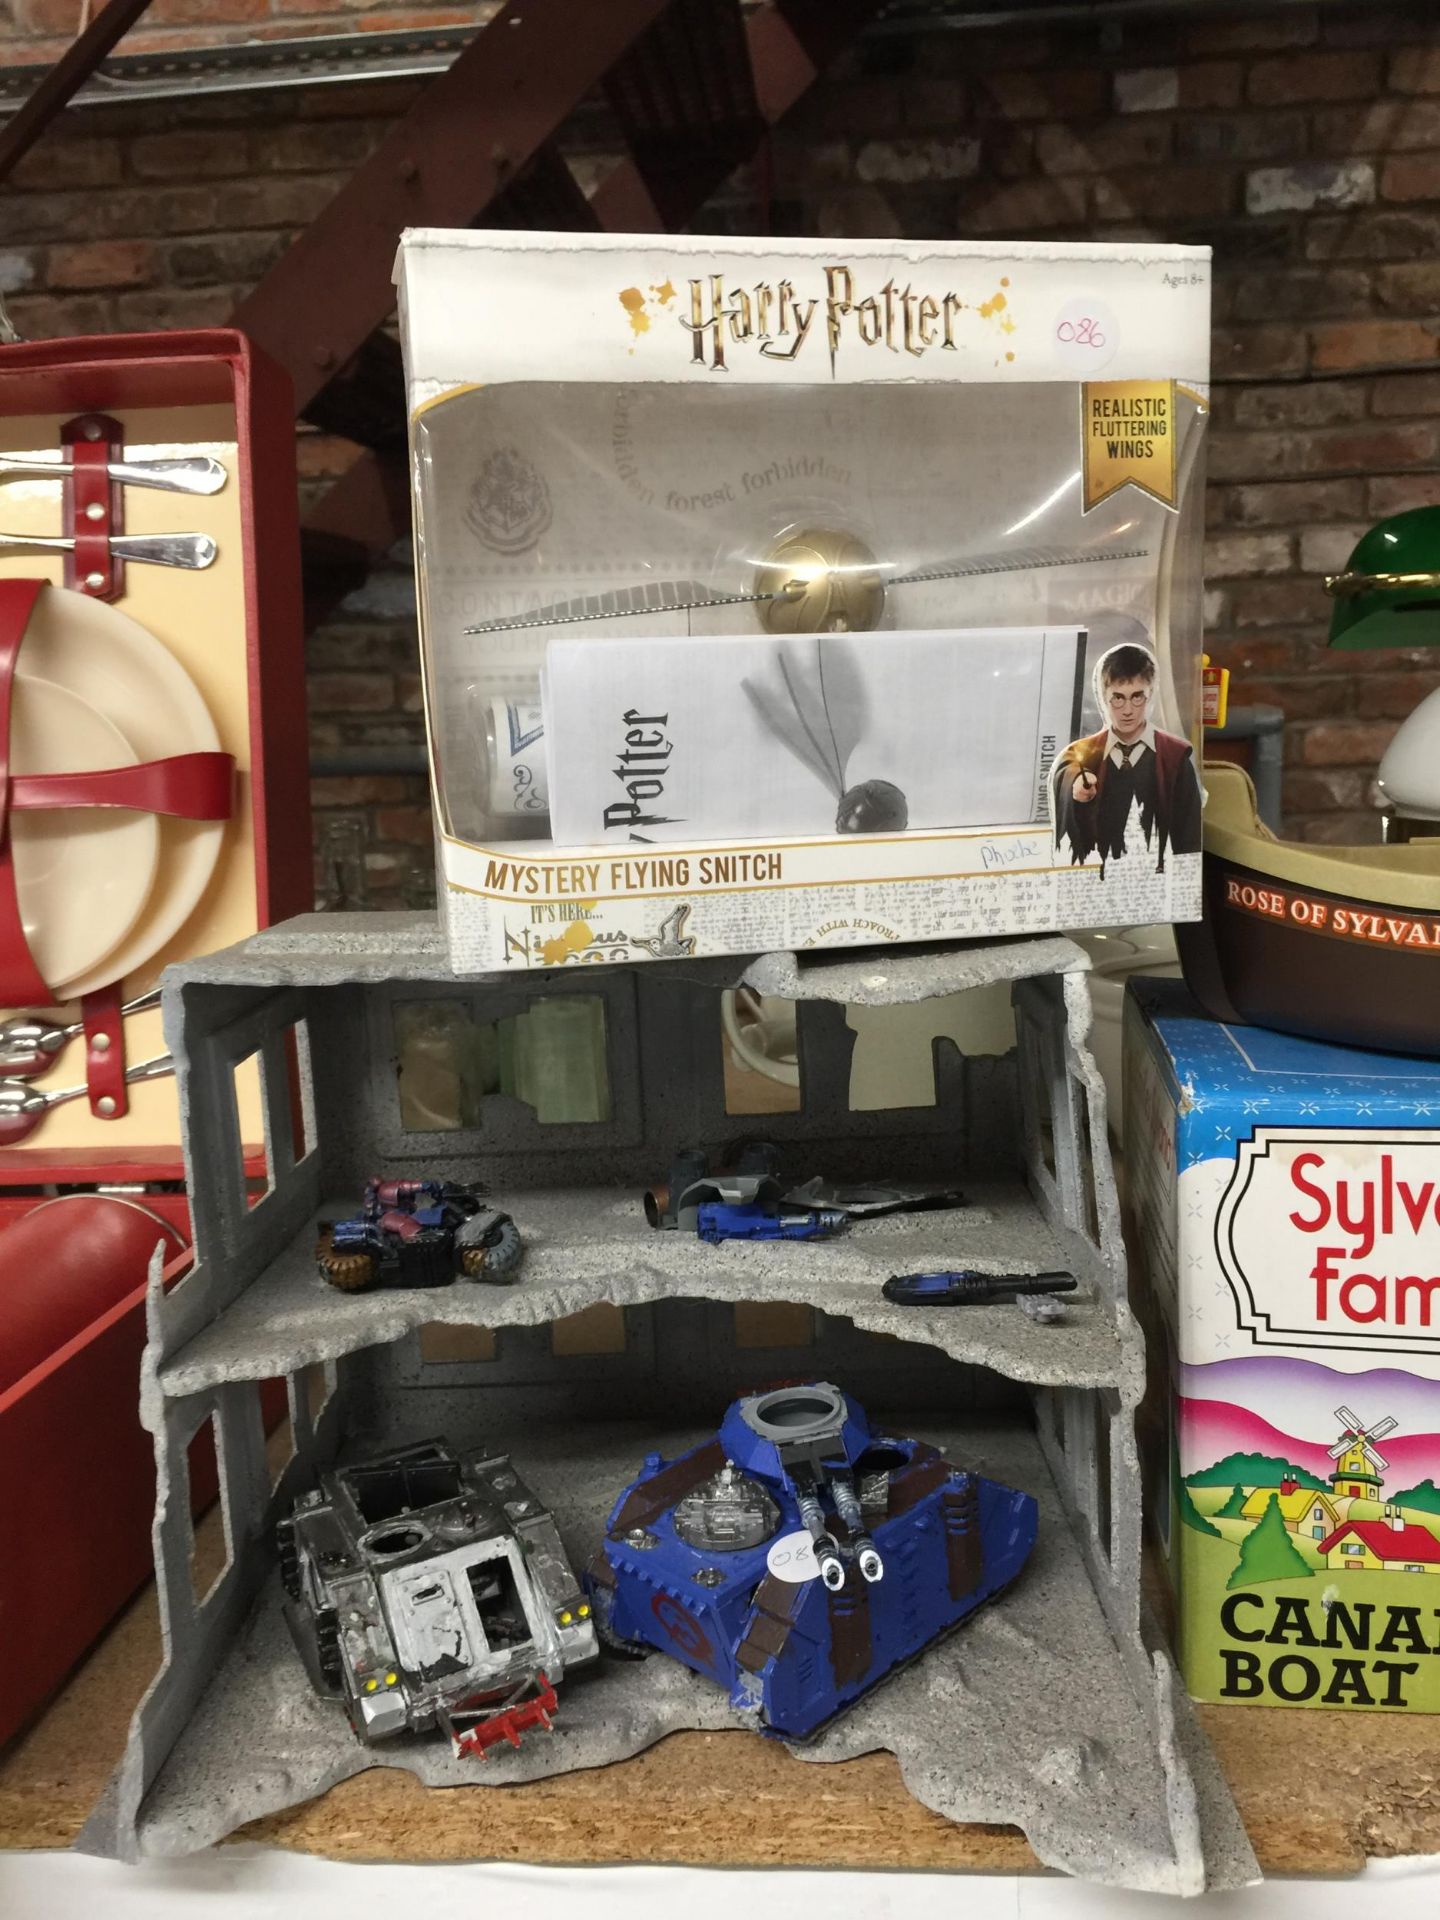 A SYLVANIAN FAMILIES CANAL BOAT IN BOX, AS NEW HARRY POTTER MYSTERY FLYING SNITCH AND A WARHAMMER - Image 3 of 4